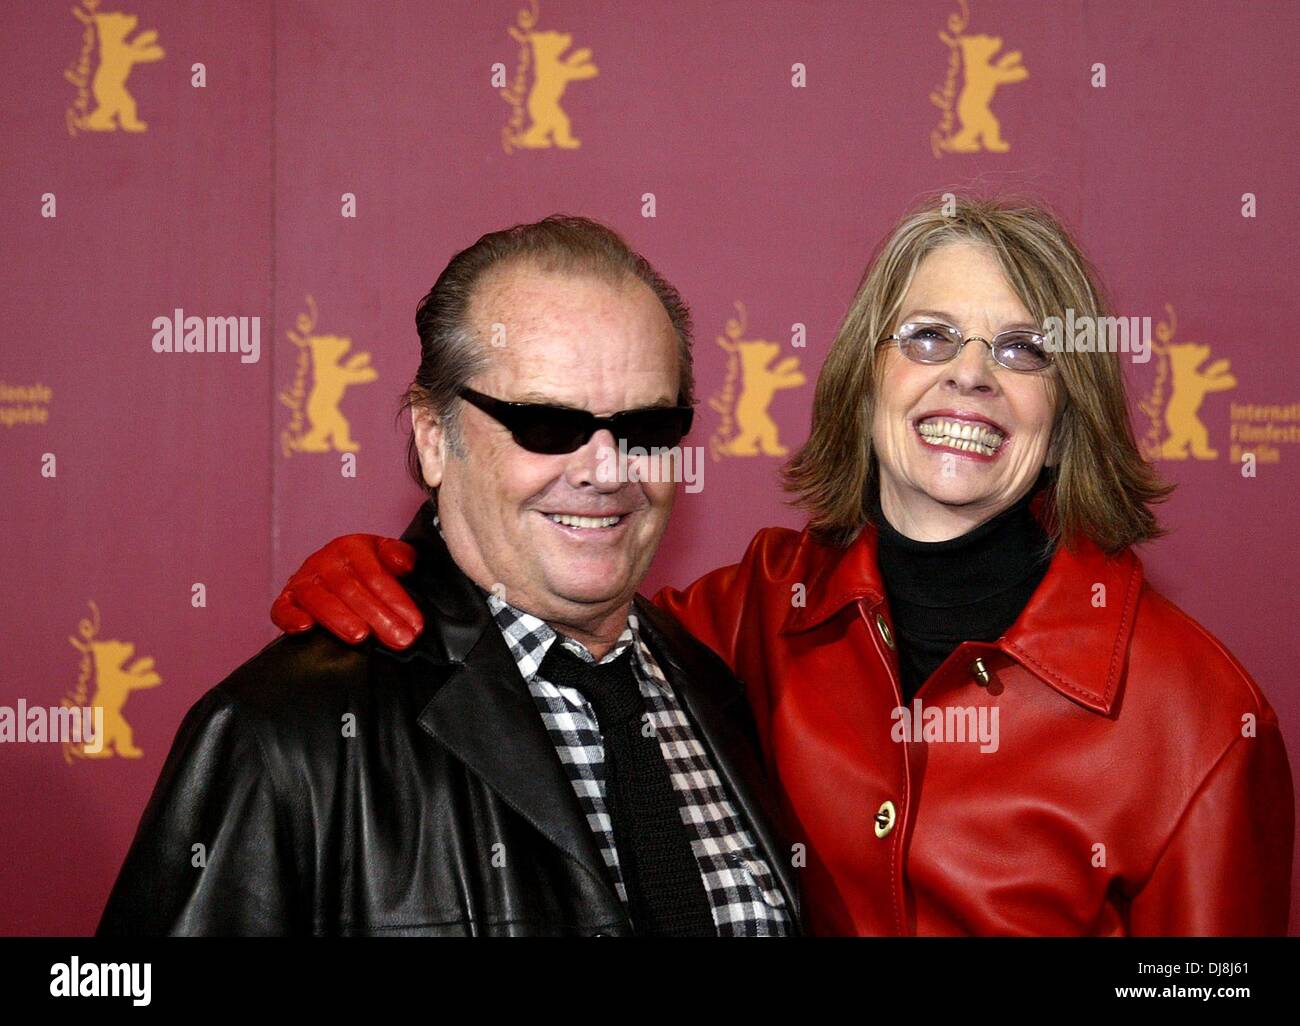 Diane Keaton and Jack Nicholson at the photocall of "Something's Gotta Give" during the Berlinale 2004. Stock Photo